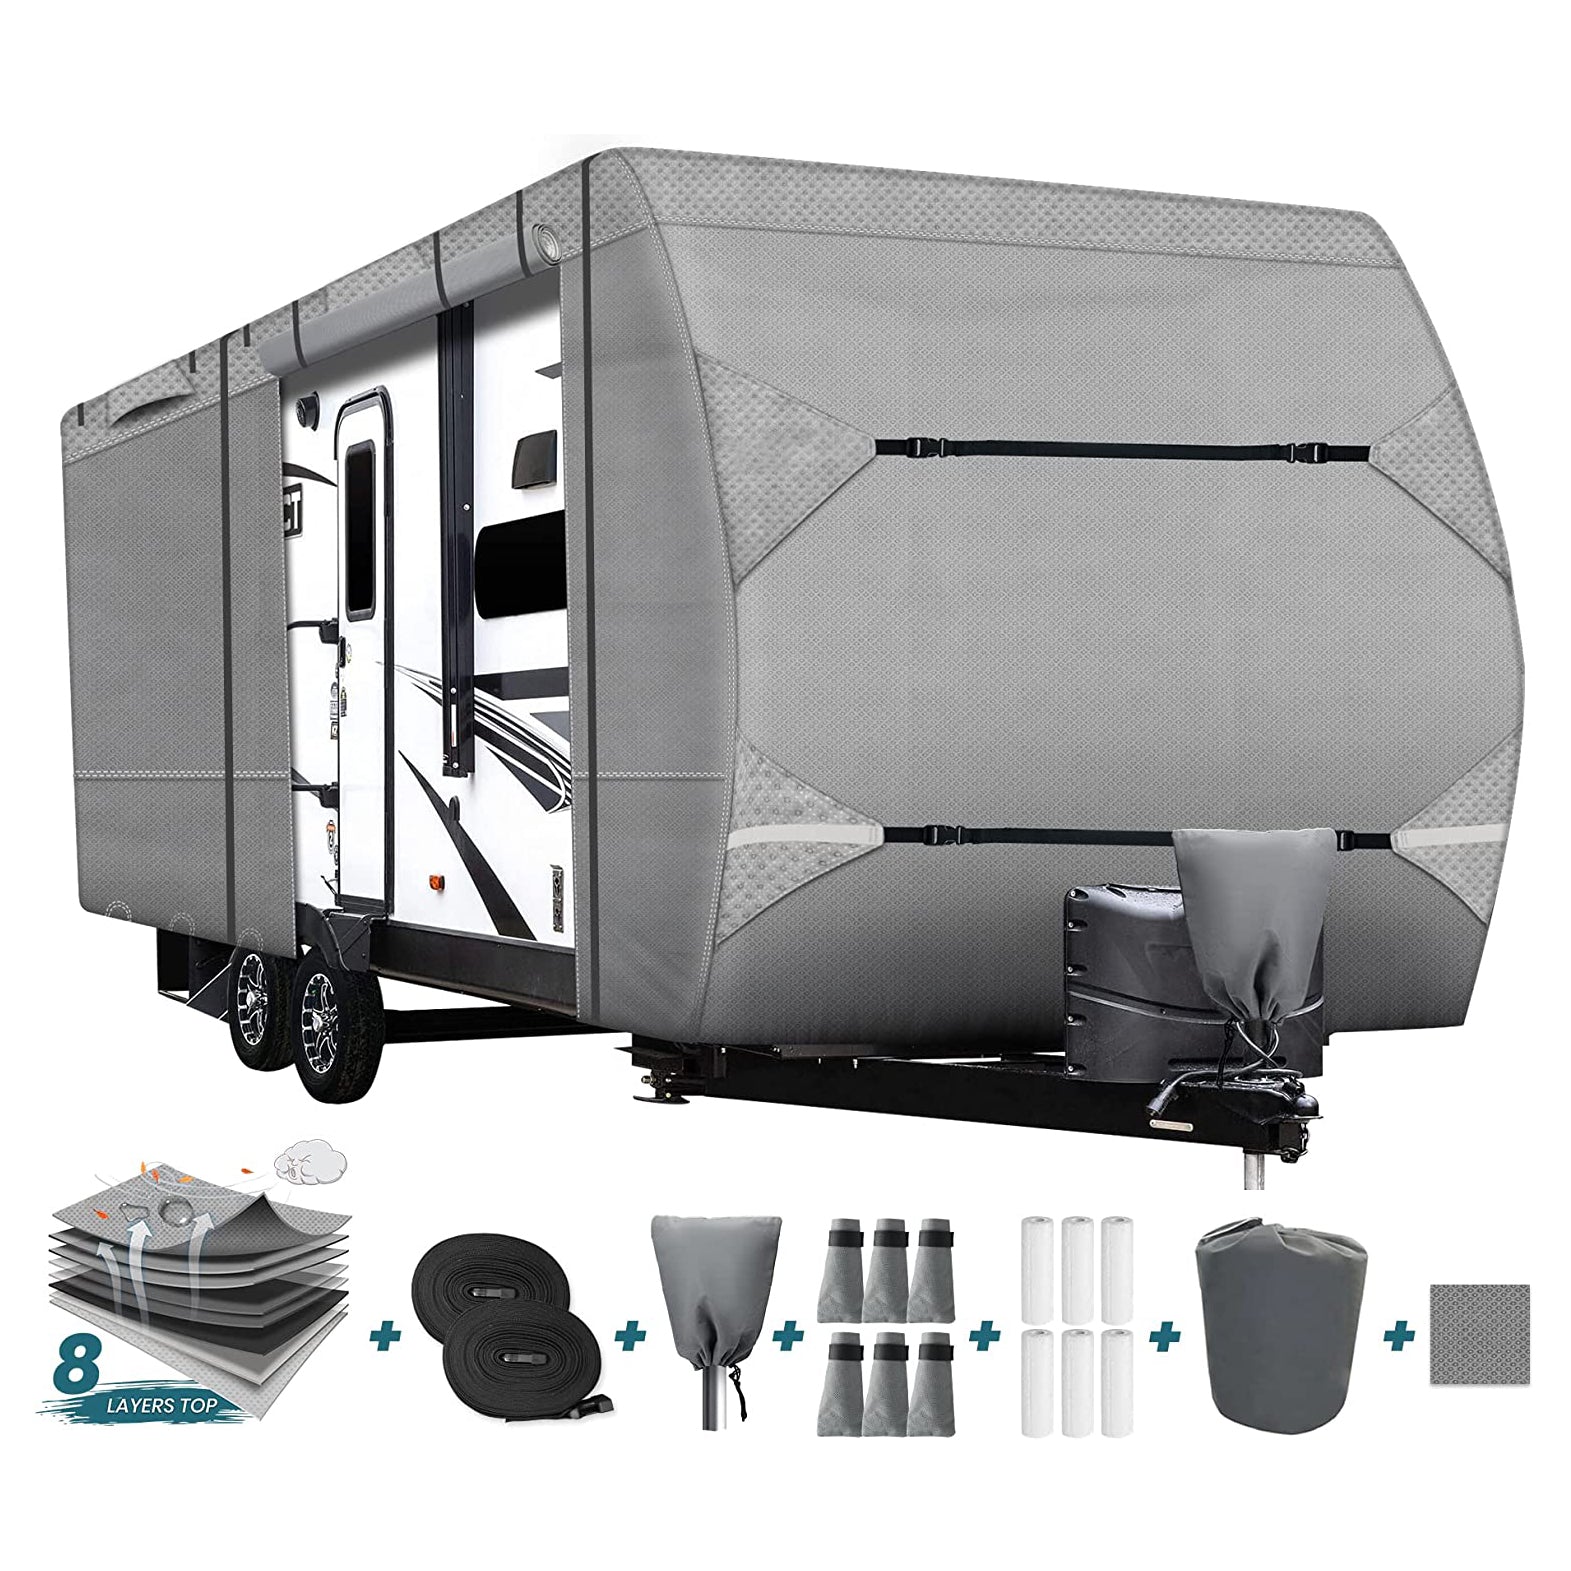 RV Covers | Travel Trailer Camper Covers Winter Waterproof 8 Layers